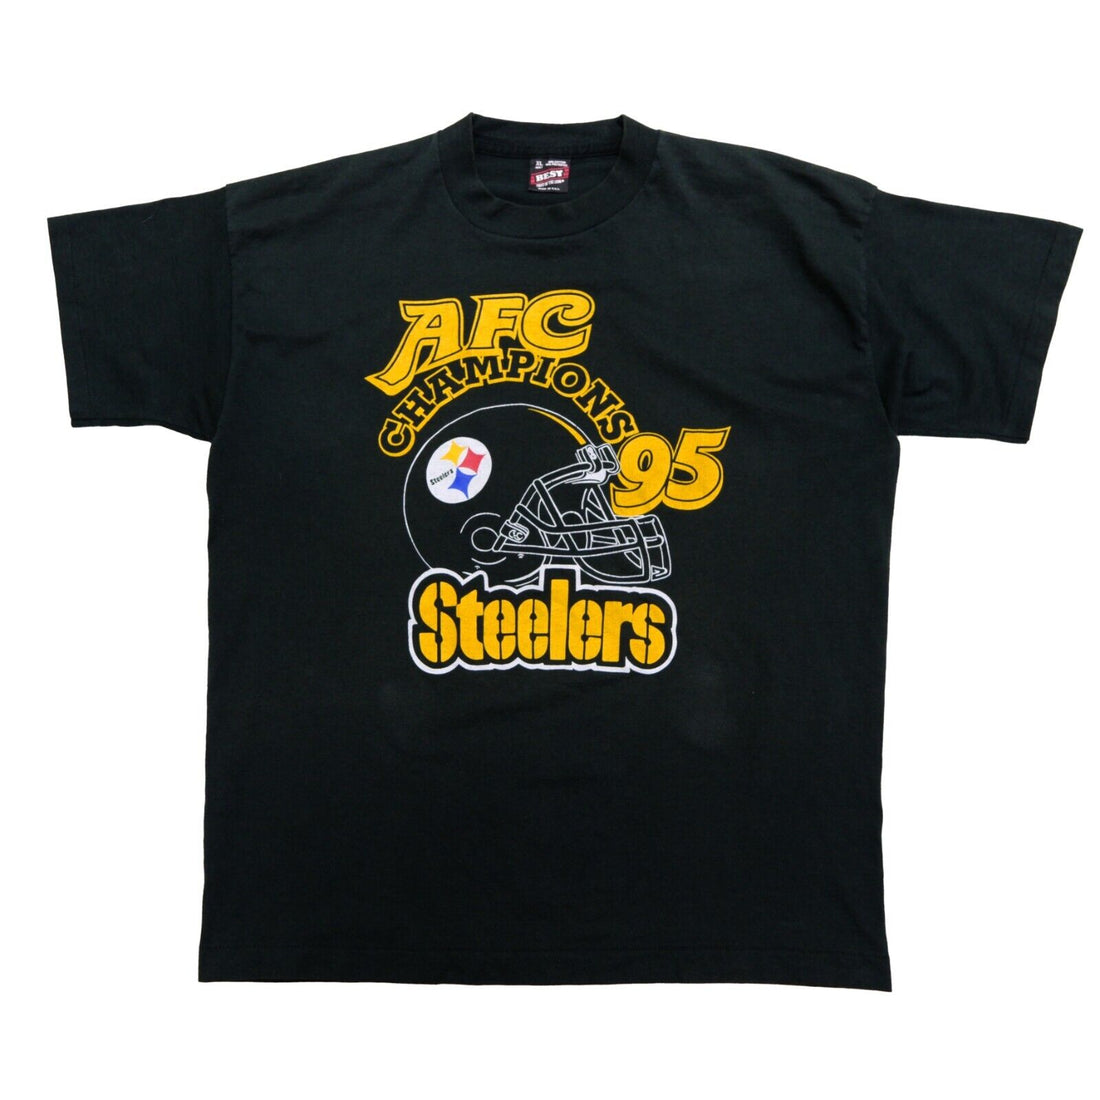 Vintage Pittsburg Steelers AFC Champions 1995 T-Shirt Size XL Made USA NFL 90s